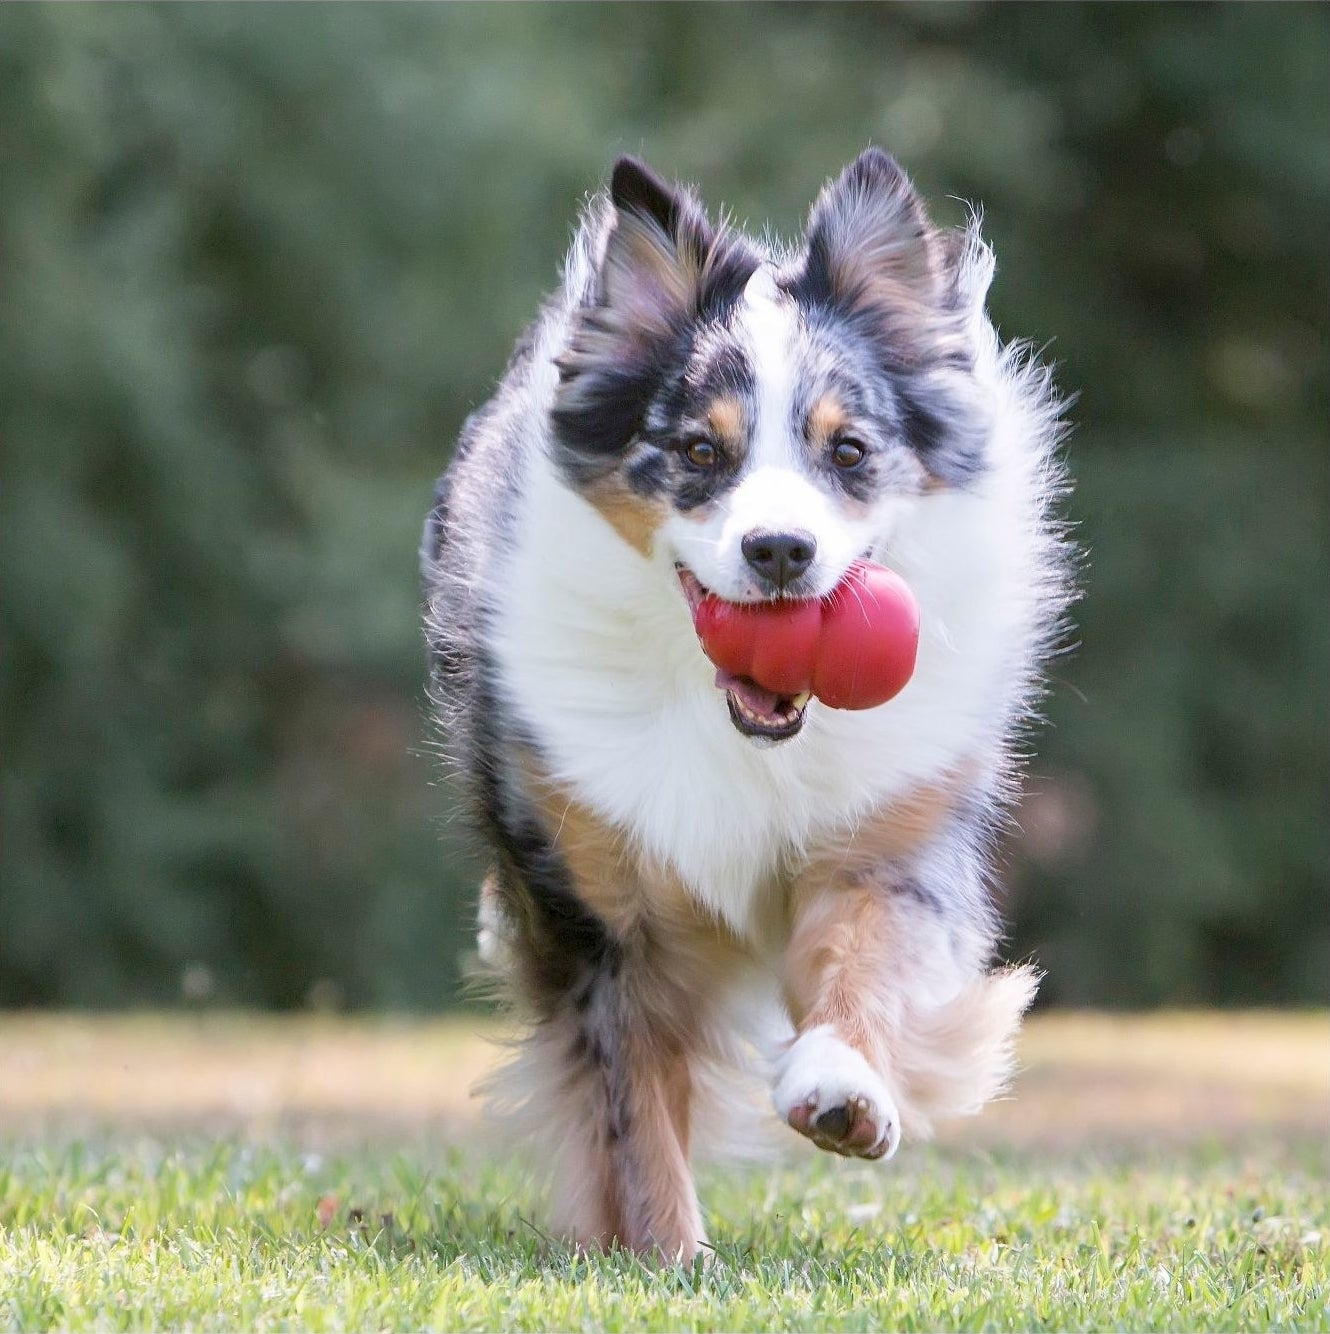 Dog running with a red Kong toy in its mouth